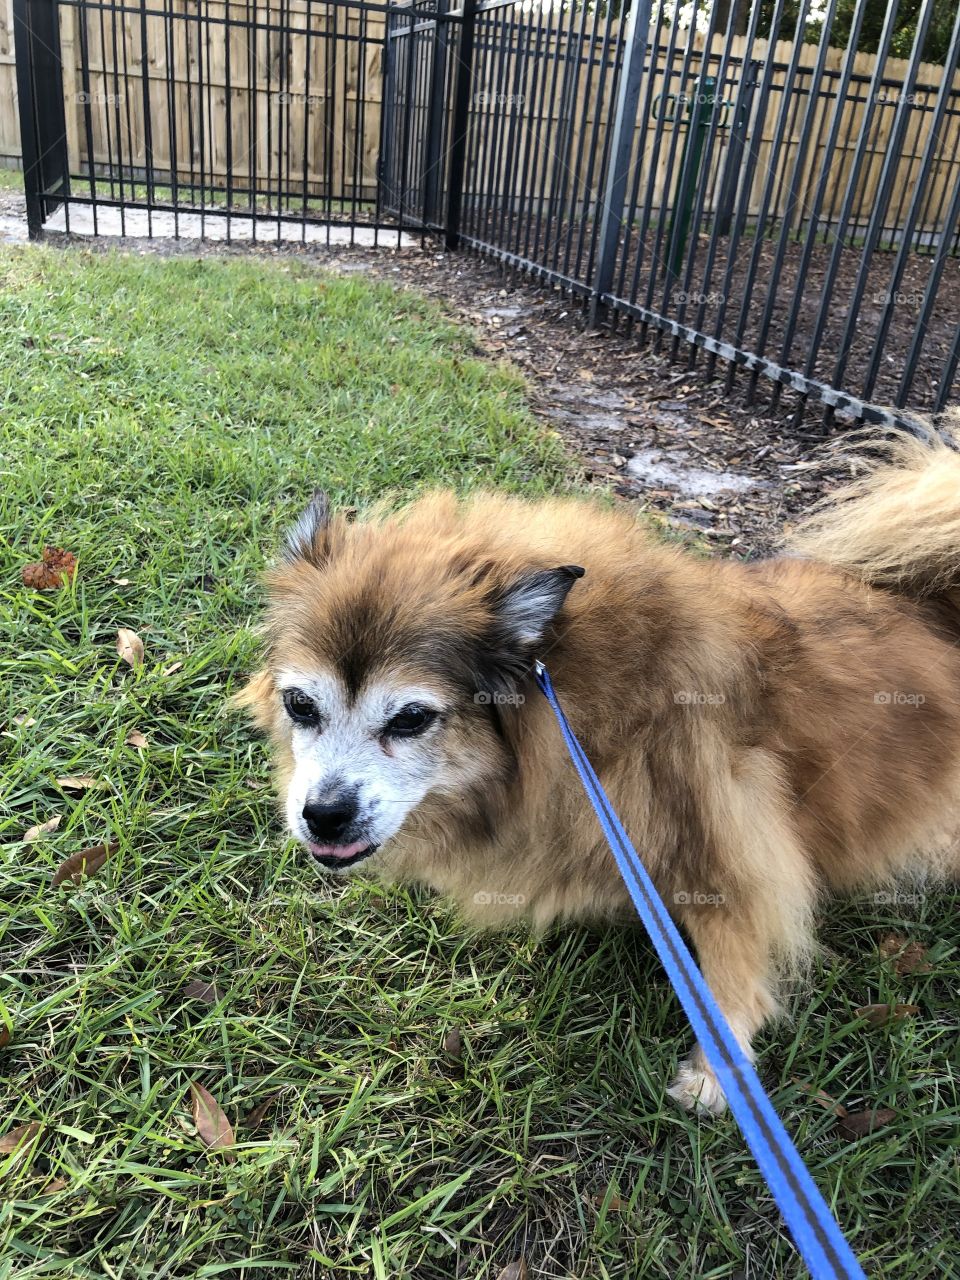 Sweet old Pomeranian on his leash at the dog park